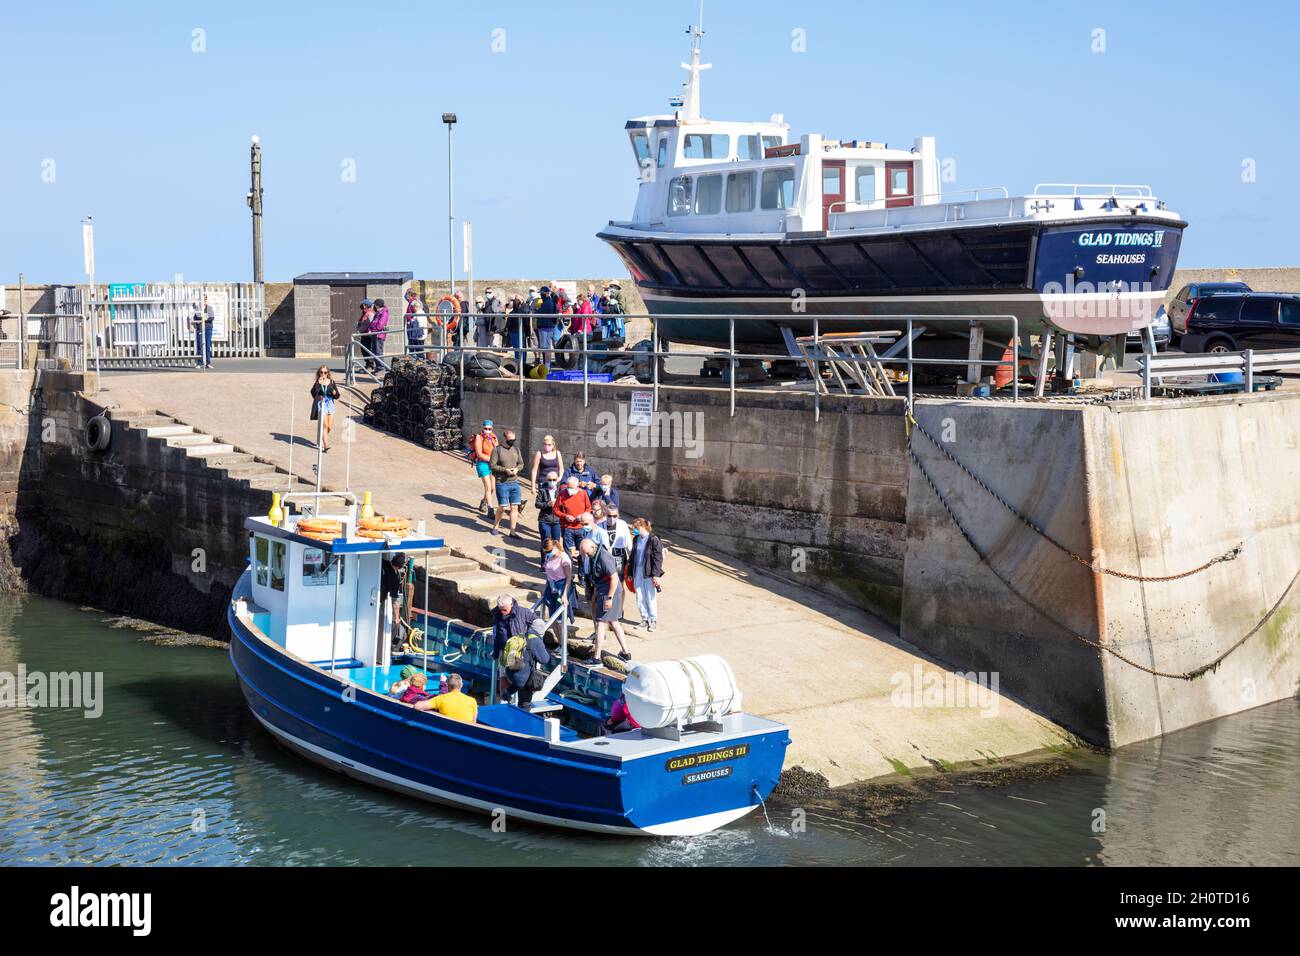 People getting onto a Sightseeing boat trip to the Farne Islands in Seahouses Harbour North Sunderland Harbour Northumberland coast England GB UK Stock Photo